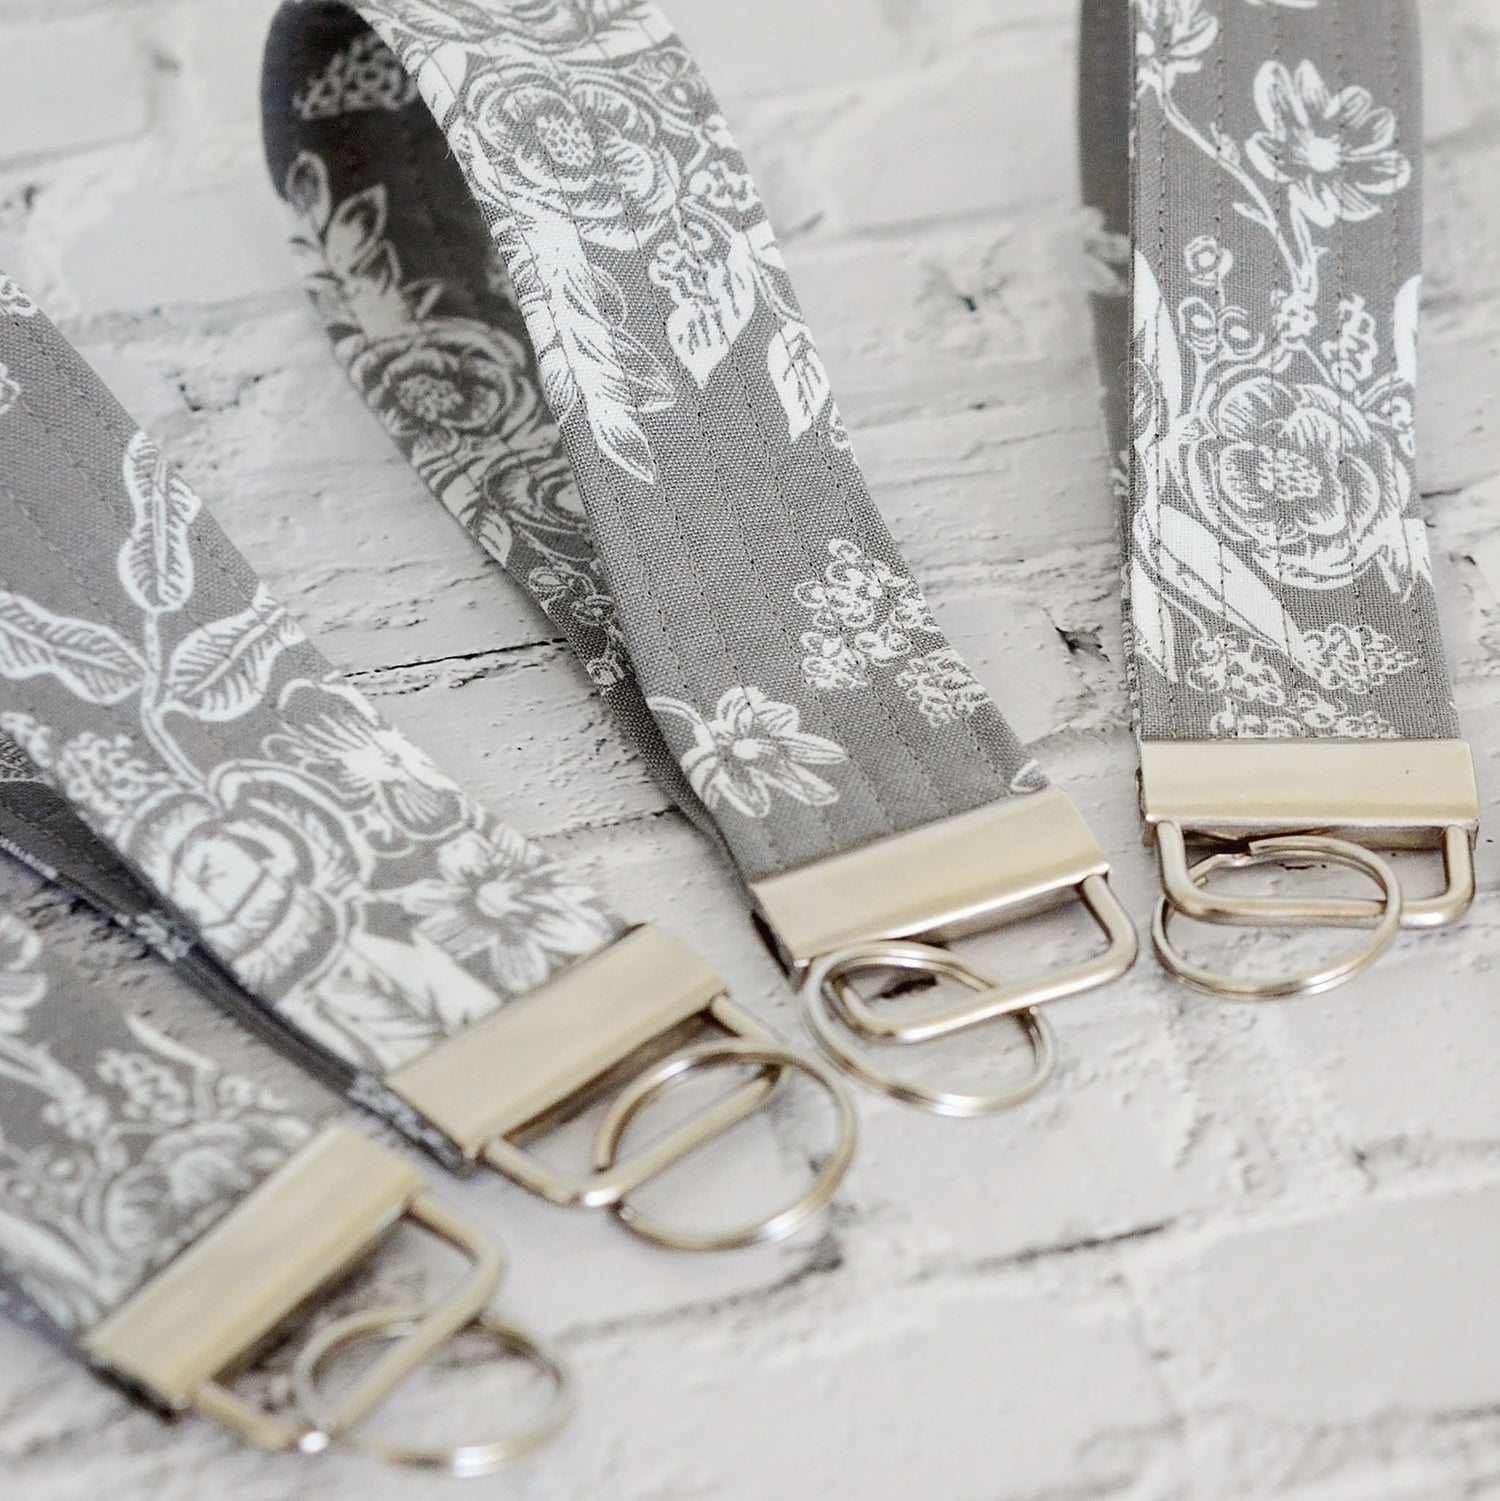 Keychain wristlets in Rifle Paper Co. fabrics and gold hardware.  Made in Canada by Yellow Petal Handmade.